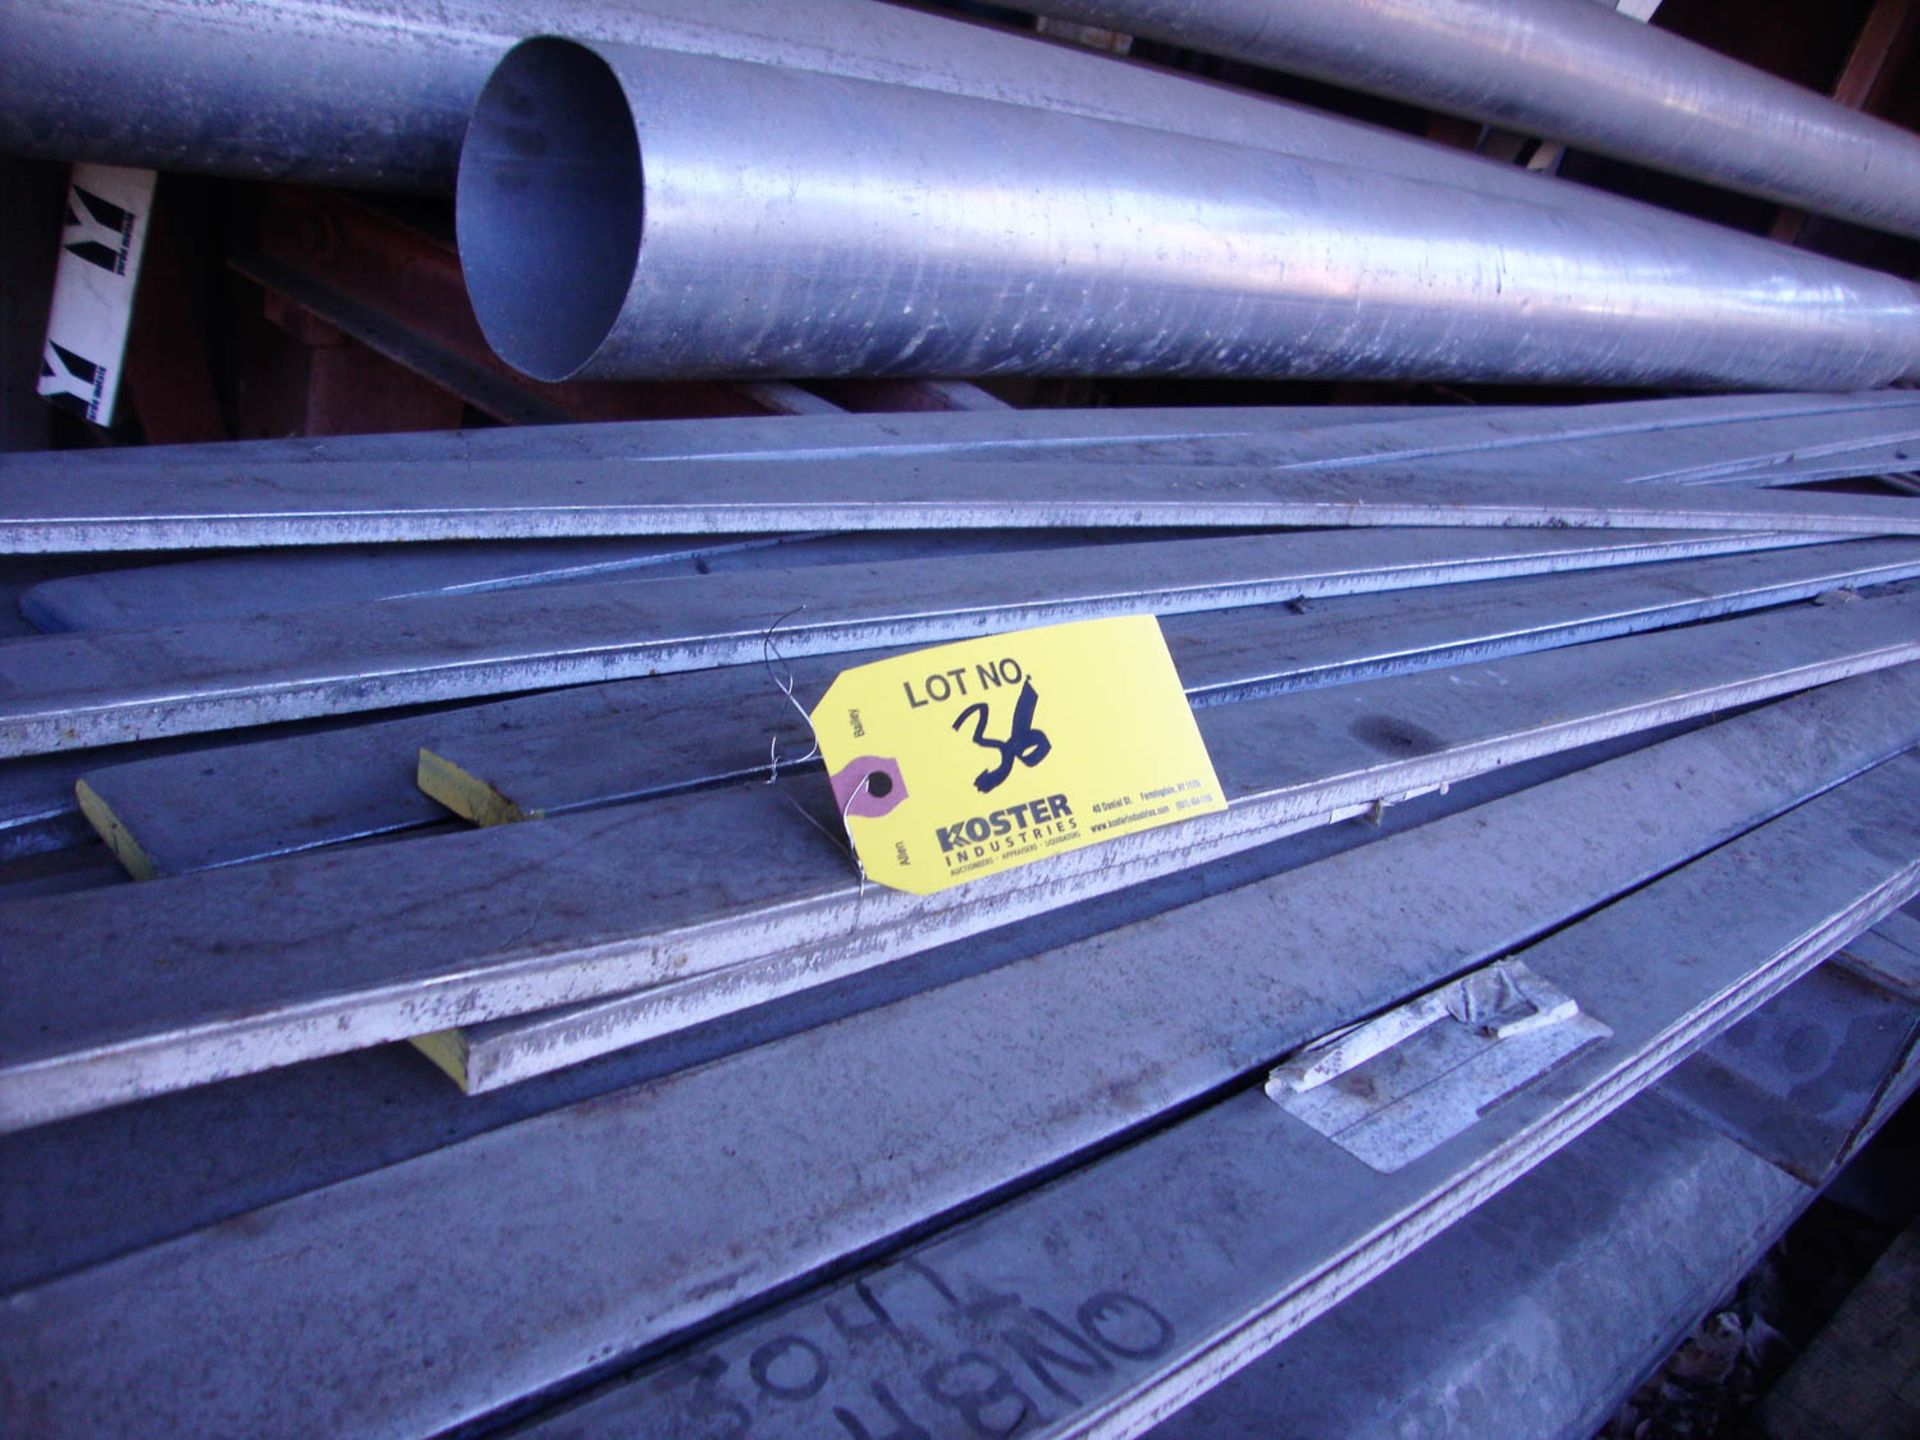 [21] 1/2'' X 2" STAINLESS STEEL FLAT BARS, 10' LONG